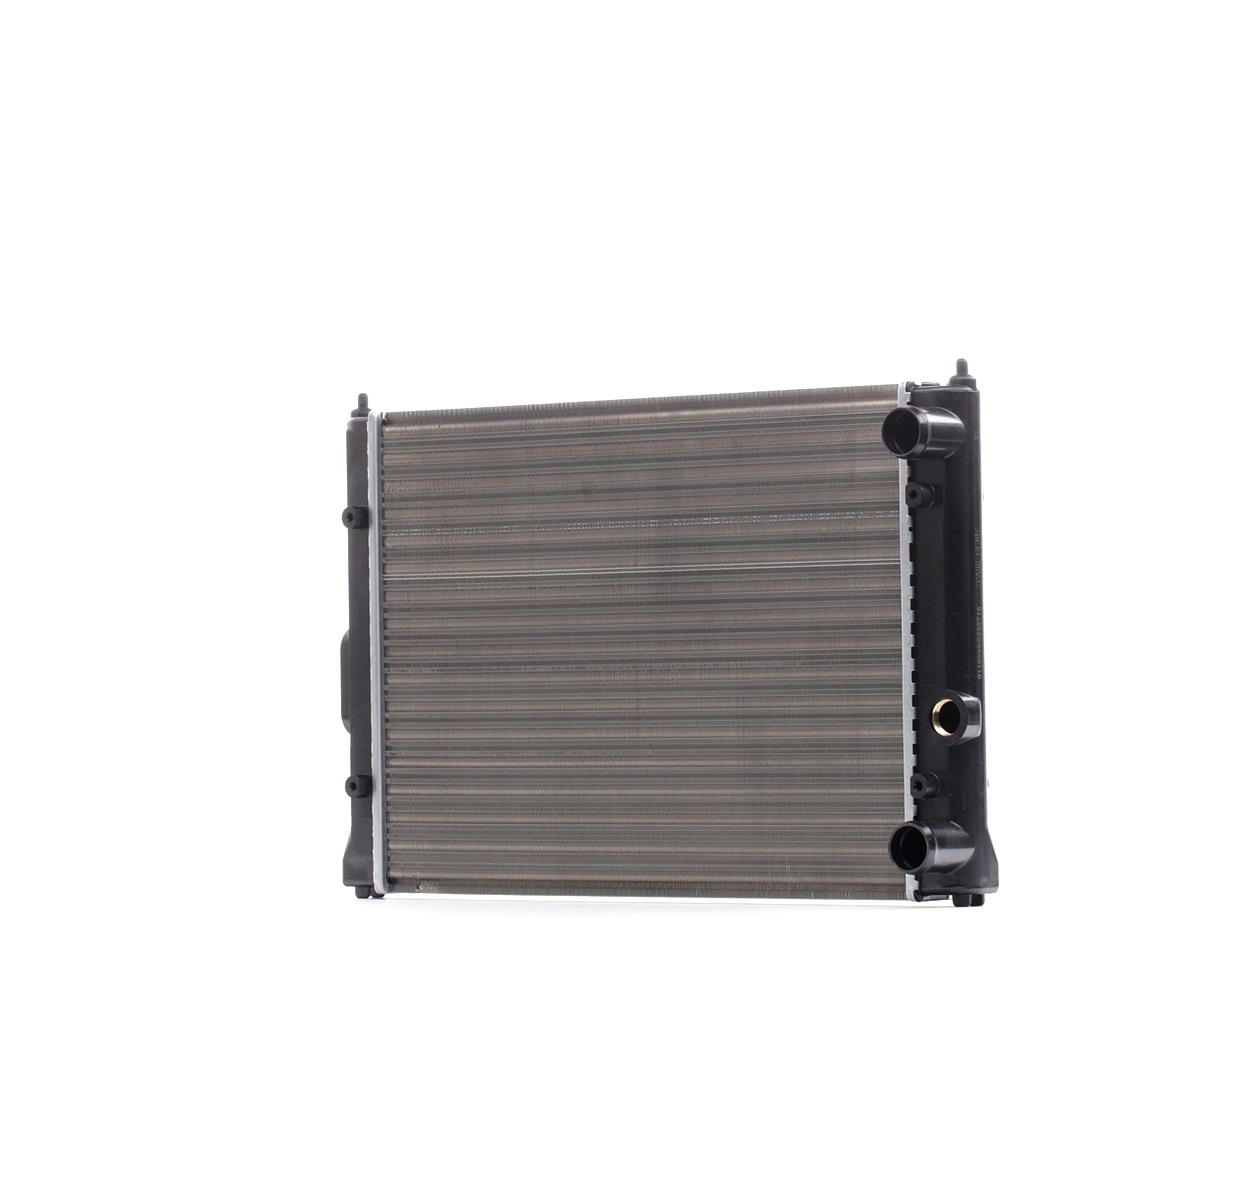 STARK SKRD-0120443 Engine radiator Aluminium, for vehicles with manual transmission, for vehicles without air conditioning